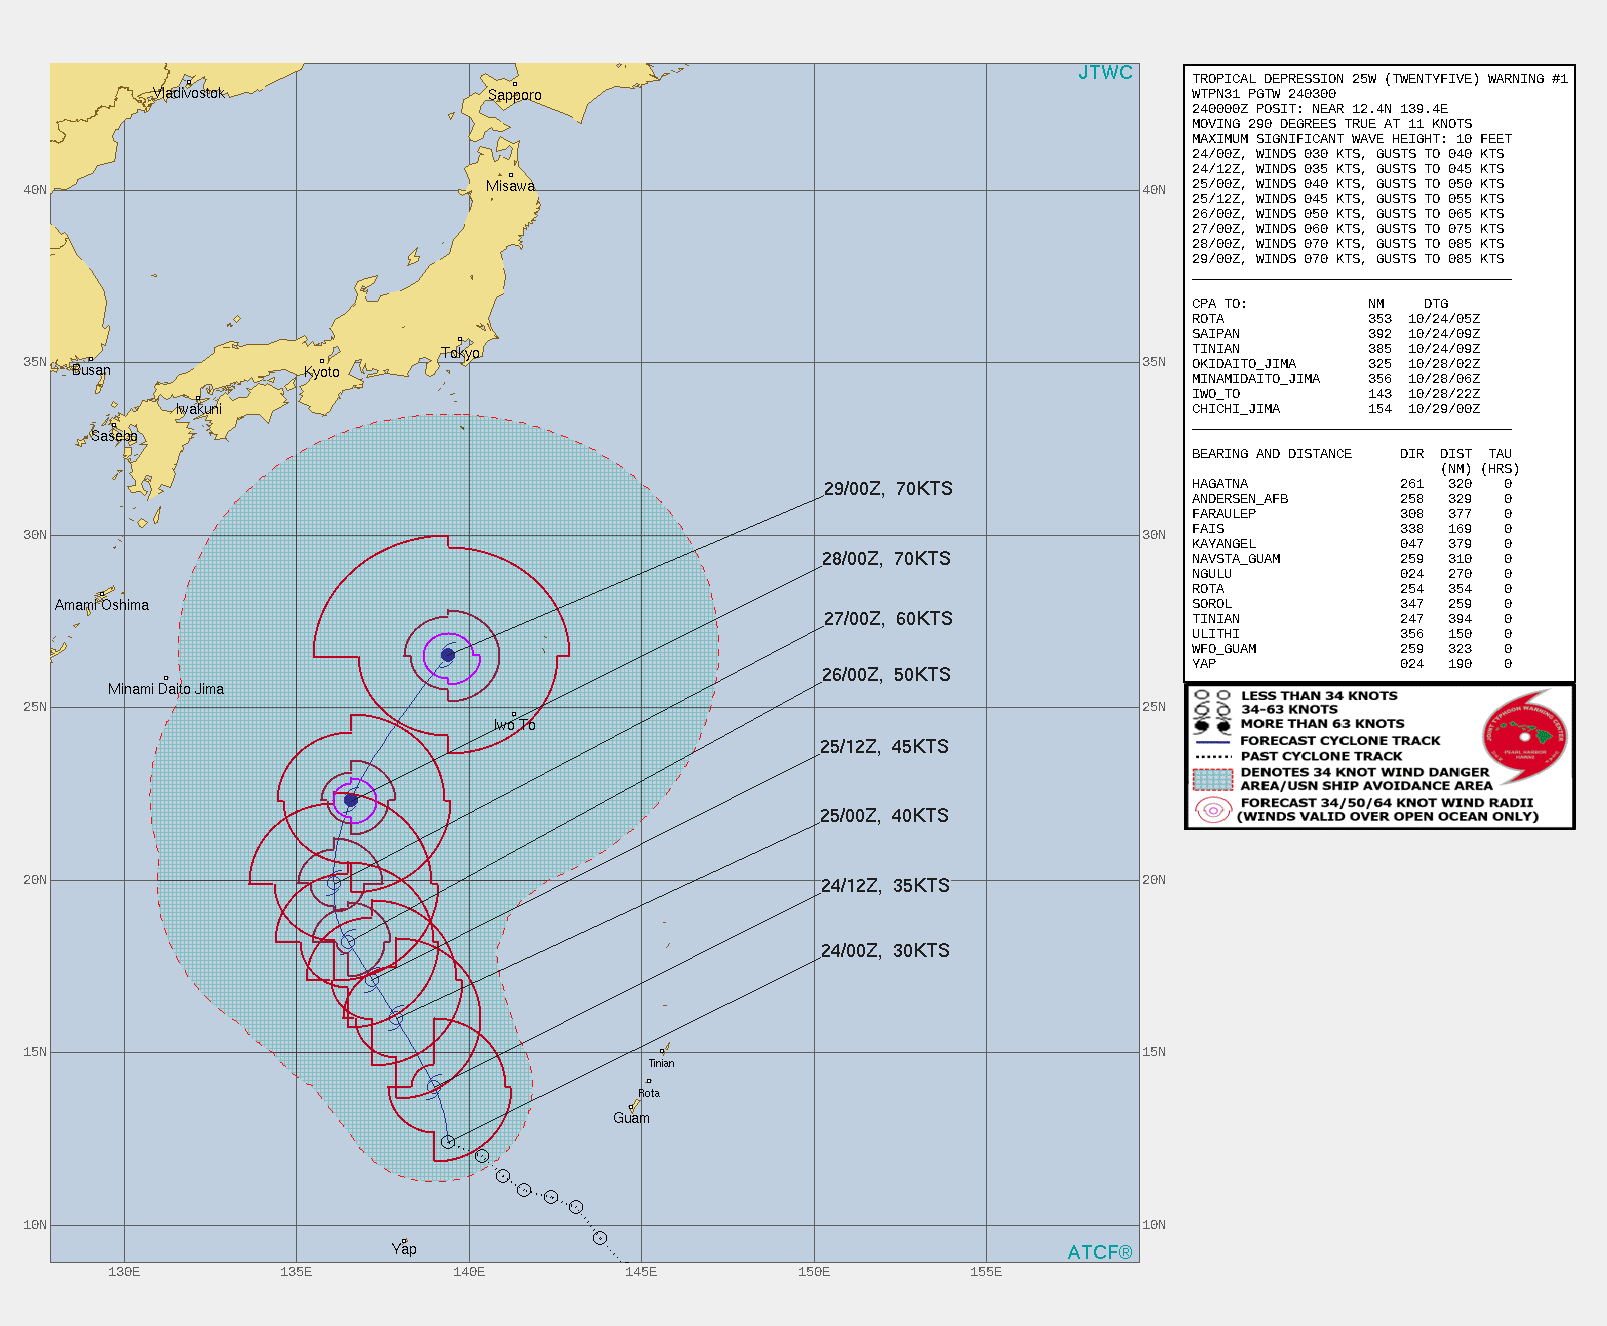 FORECAST REASONING.  SIGNIFICANT FORECAST CHANGES: THIS INITIAL PROGNOSTIC REASONING MESSAGE ESTABLISHES THE FORECAST PHILOSOPHY.  FORECAST DISCUSSION: TD 25W WILL TRACK TO THE NORTH OVER THE NEXT 72 HOURS AS THE MAIN STEERING FROM THE SUBTROPICAL RIDGE(STR) REMAINS TO THE EAST. AT 48H A LOW PRESSURE SYSTEM WILL FORM JUST SOUTH OF HONSHU AND BEGIN TRACKING TO THE EAST WITH A WEAK FRONTAL BOUNDARY DRAWING 25W IN ITS WAKE. BY 72H TD 25W WILL SPEED UP AND INTENSIFY TO 60 KNOTS AS IT BEGINS TO ROUND THE STR AXIS. SHORTLY BEFORE 96H THE SYSTEM WILL CONTINUE TO INTENSIFY TO TYPHOON STRENGTH AS IT REACHES A PEAK INTENSITY OF 70 KNOTS/CAT 1. THEREAFTER, THE SYSTEM WILL CONTINUE TRACKING ALONG THE WESTERN SIDE OF THE STR AND APPROACH THE BAROCLINIC ZONE WELL TO THE EAST OF MAINLAND JAPAN AND BEGIN EXPERIENCING GREATER SHEAR AND COOLER SSTS.